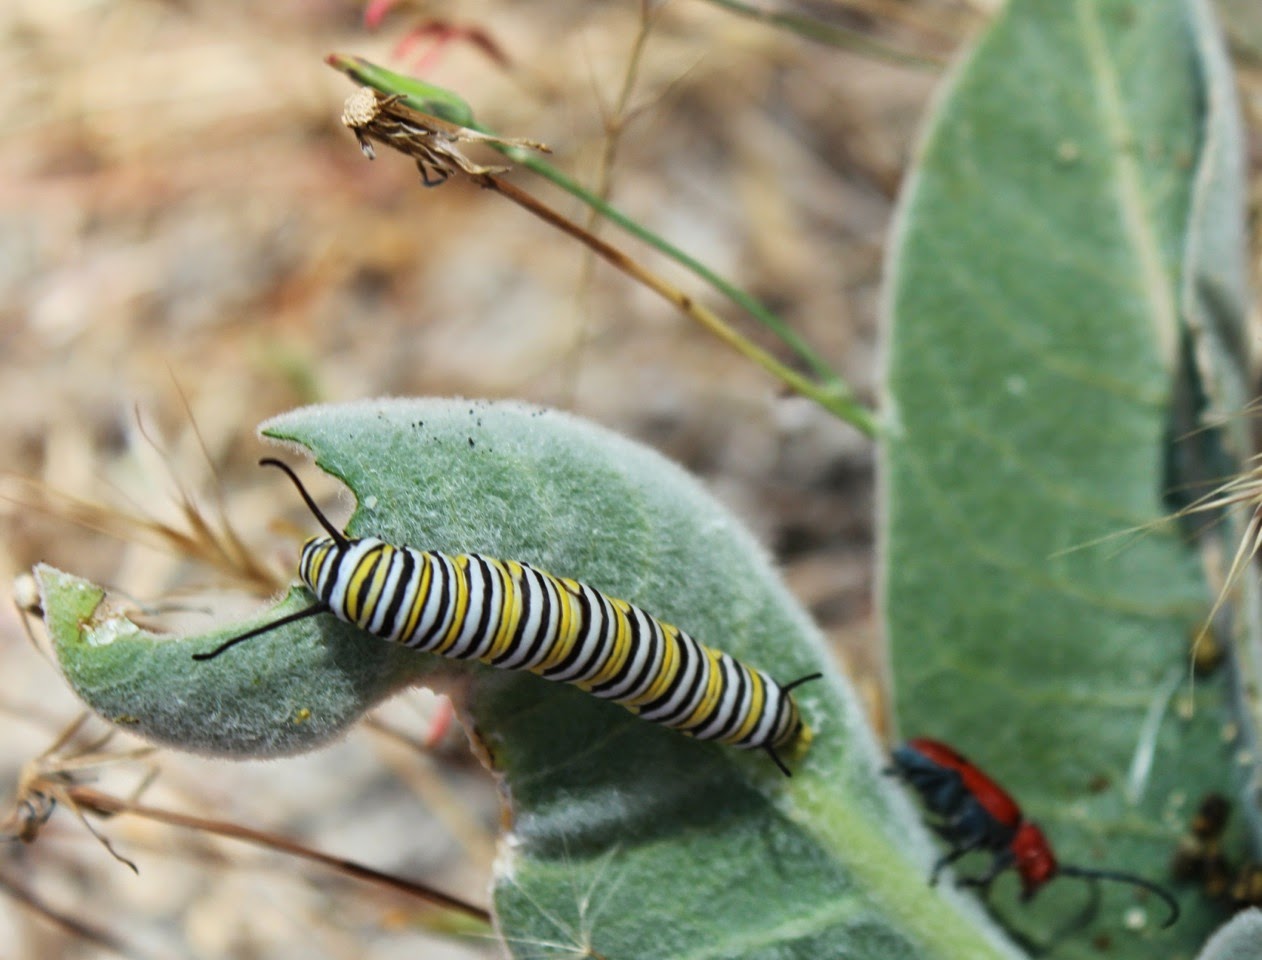 Indian Milkweed (also commonly called Woolly Milkweed) provides food for hungry caterpillars